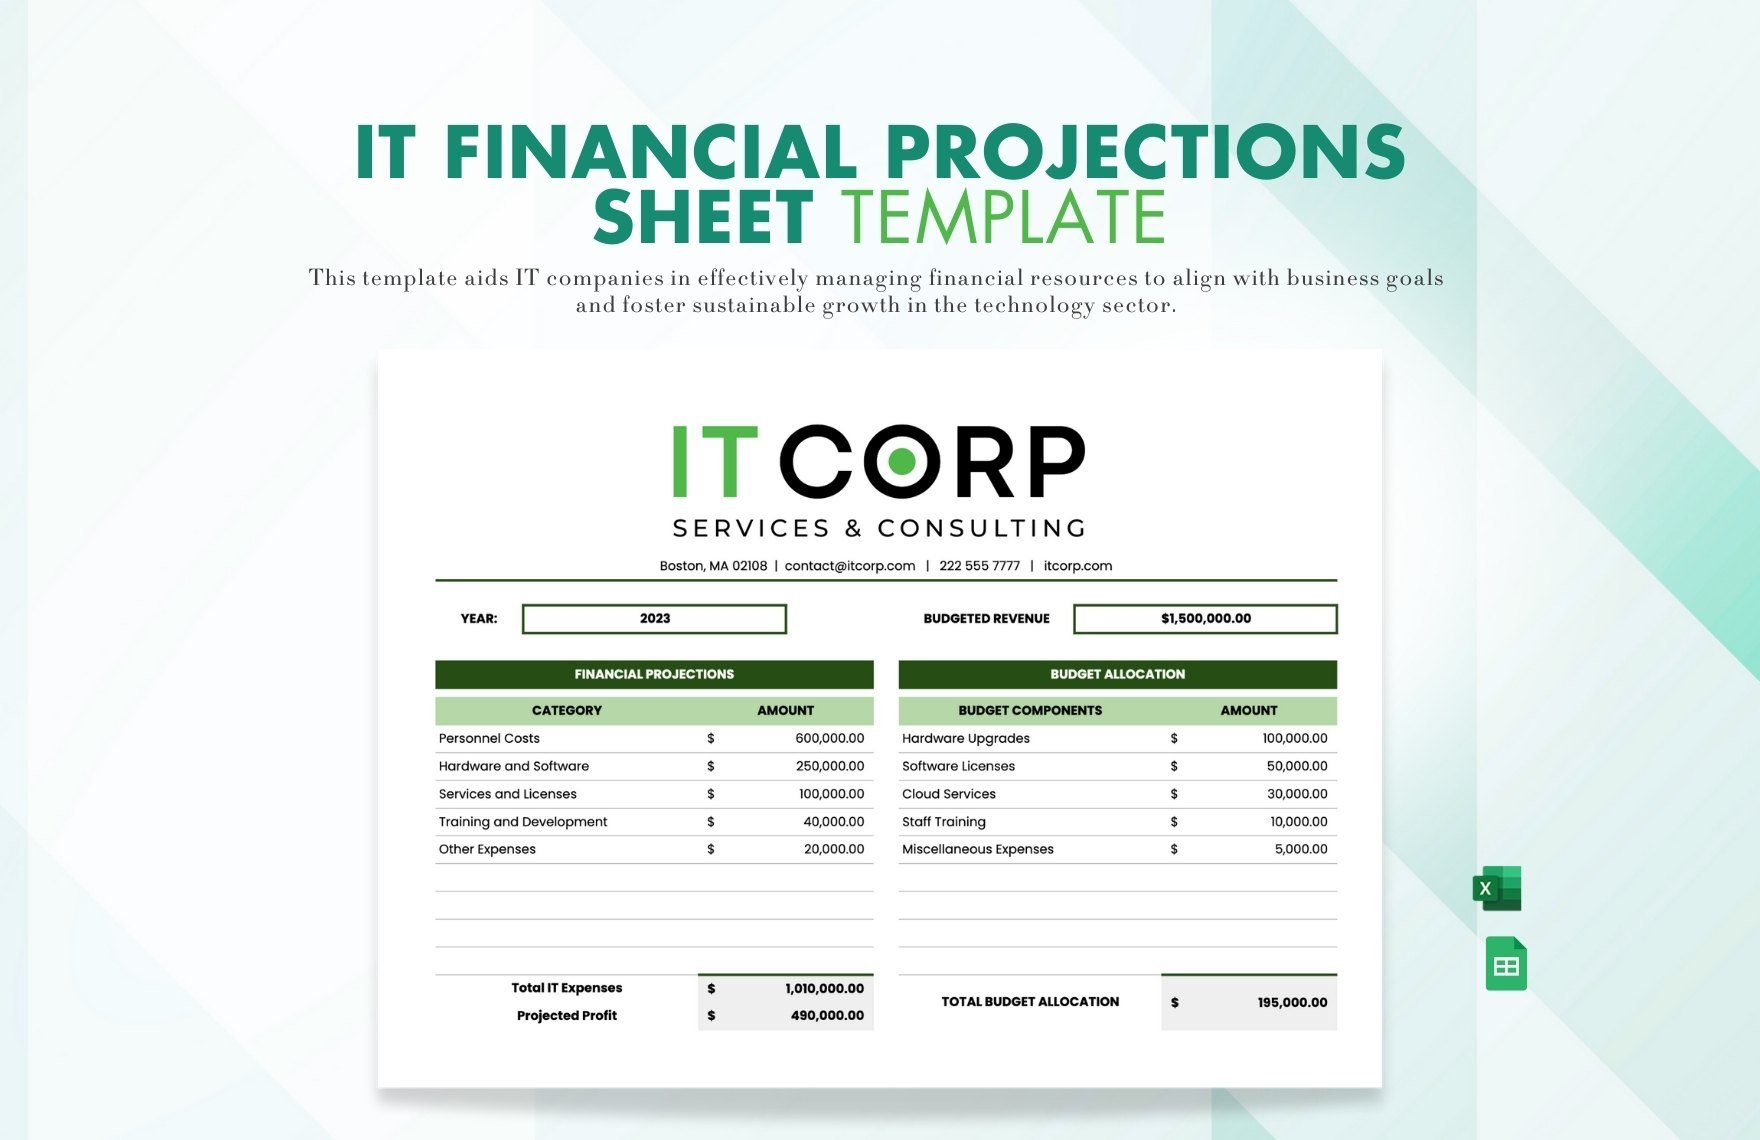 IT Financial Projections Sheet Template in Excel, Google Sheets